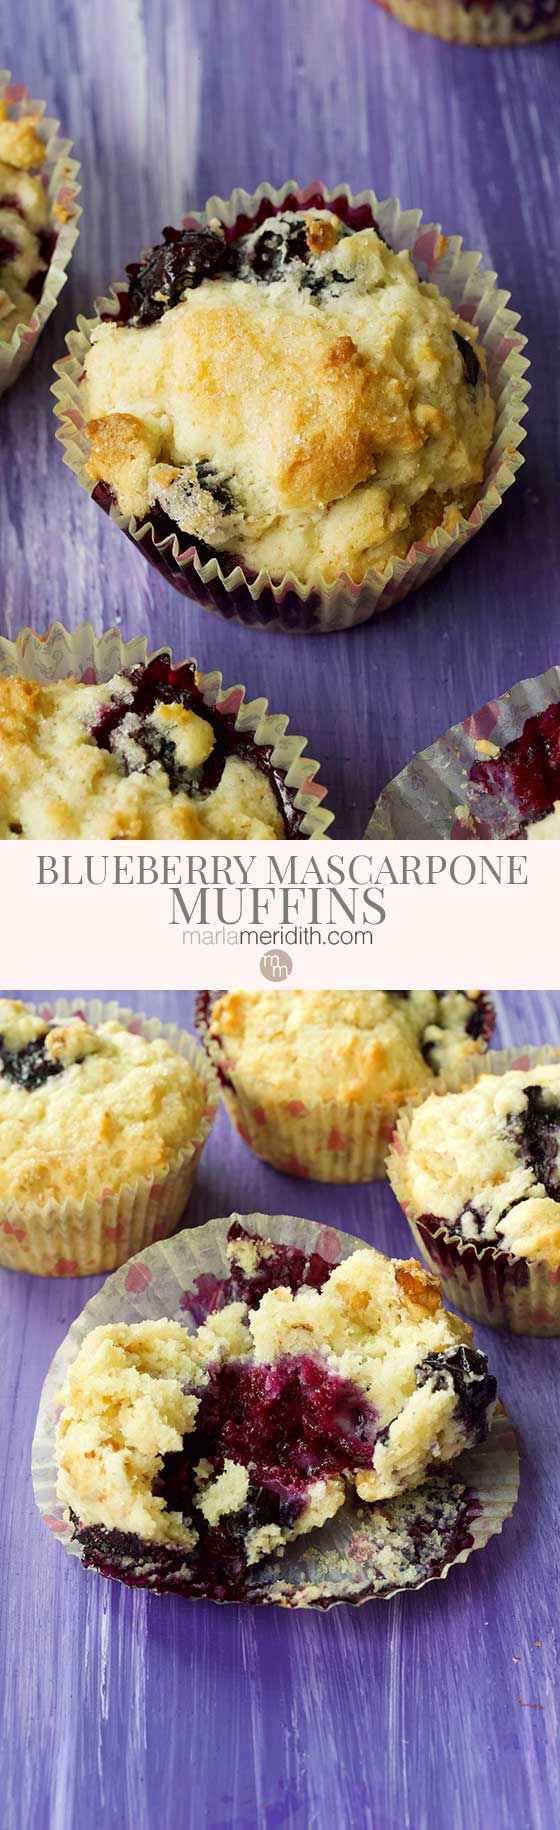 We are smitten with these delicious Blueberry Walnut Mascarpone Muffins. This recipe is simple to prepare and great for breakfast, brunch or as an anytime snack. MarlaMeridith.com